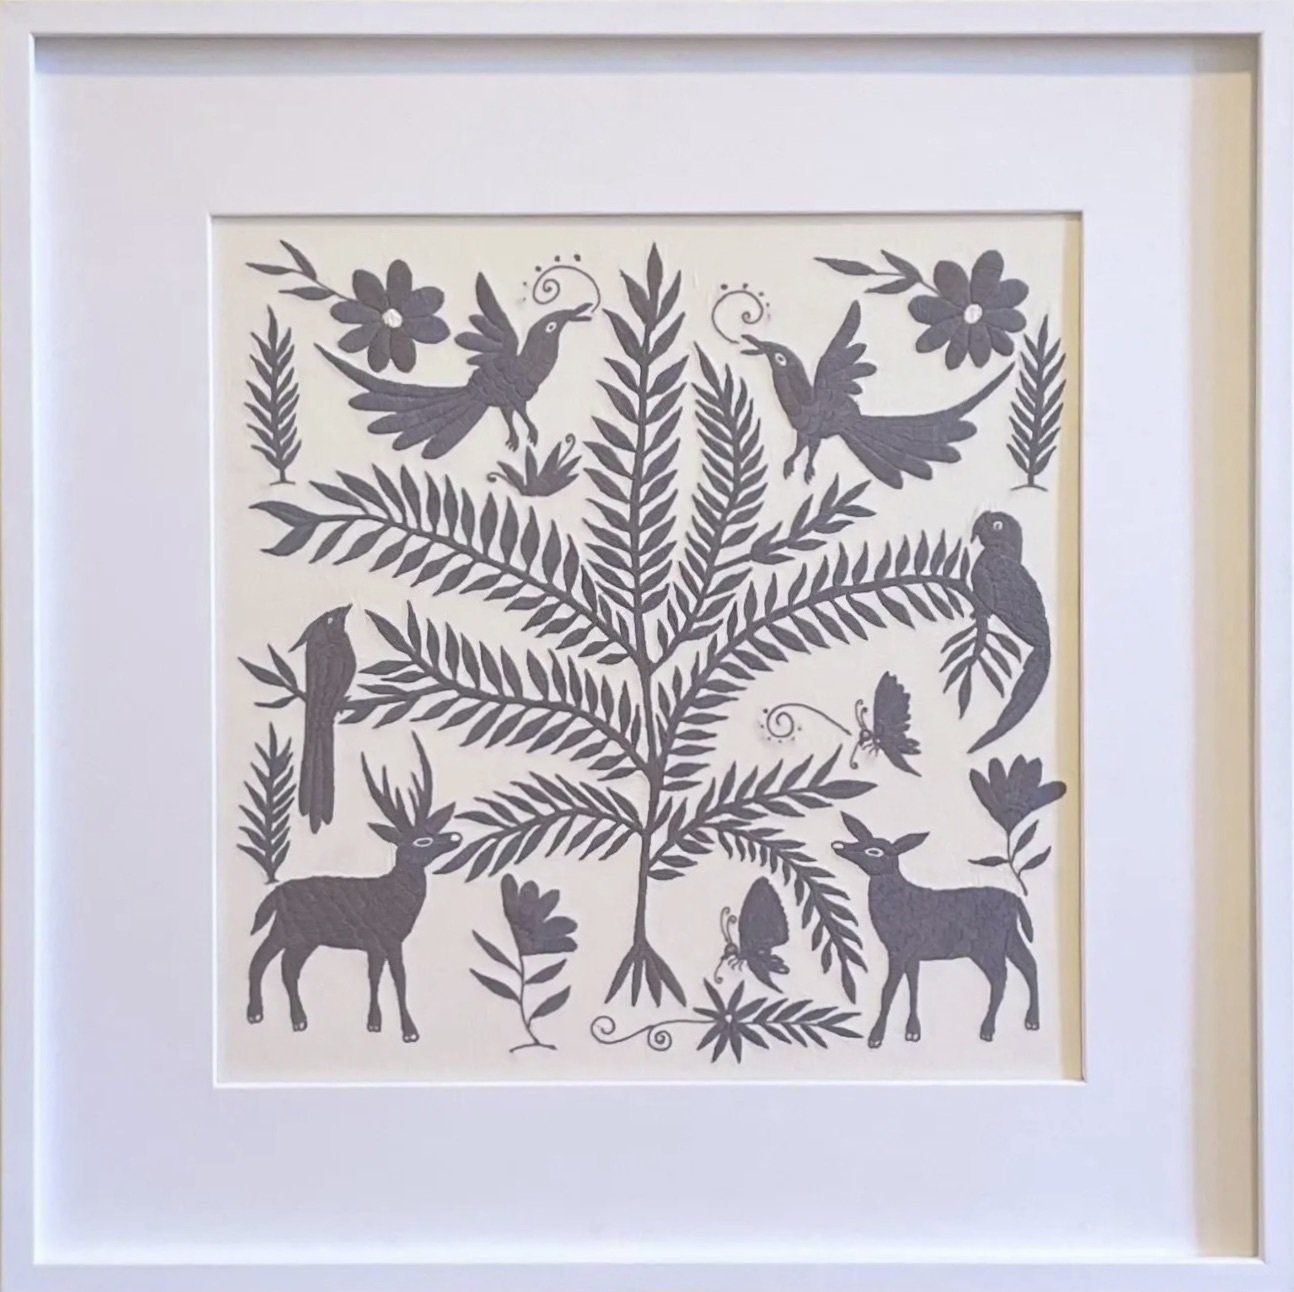 Otomi Art, Otomi Artwork, Otomi Embroidery, Otomi,  Otomi Light Gray, This Otomi was designed by an artist and fully hand embroidered by an embroider, descendant of the Otomi, in the region of Tenango de Doria, Mexico, with their traditional and famous